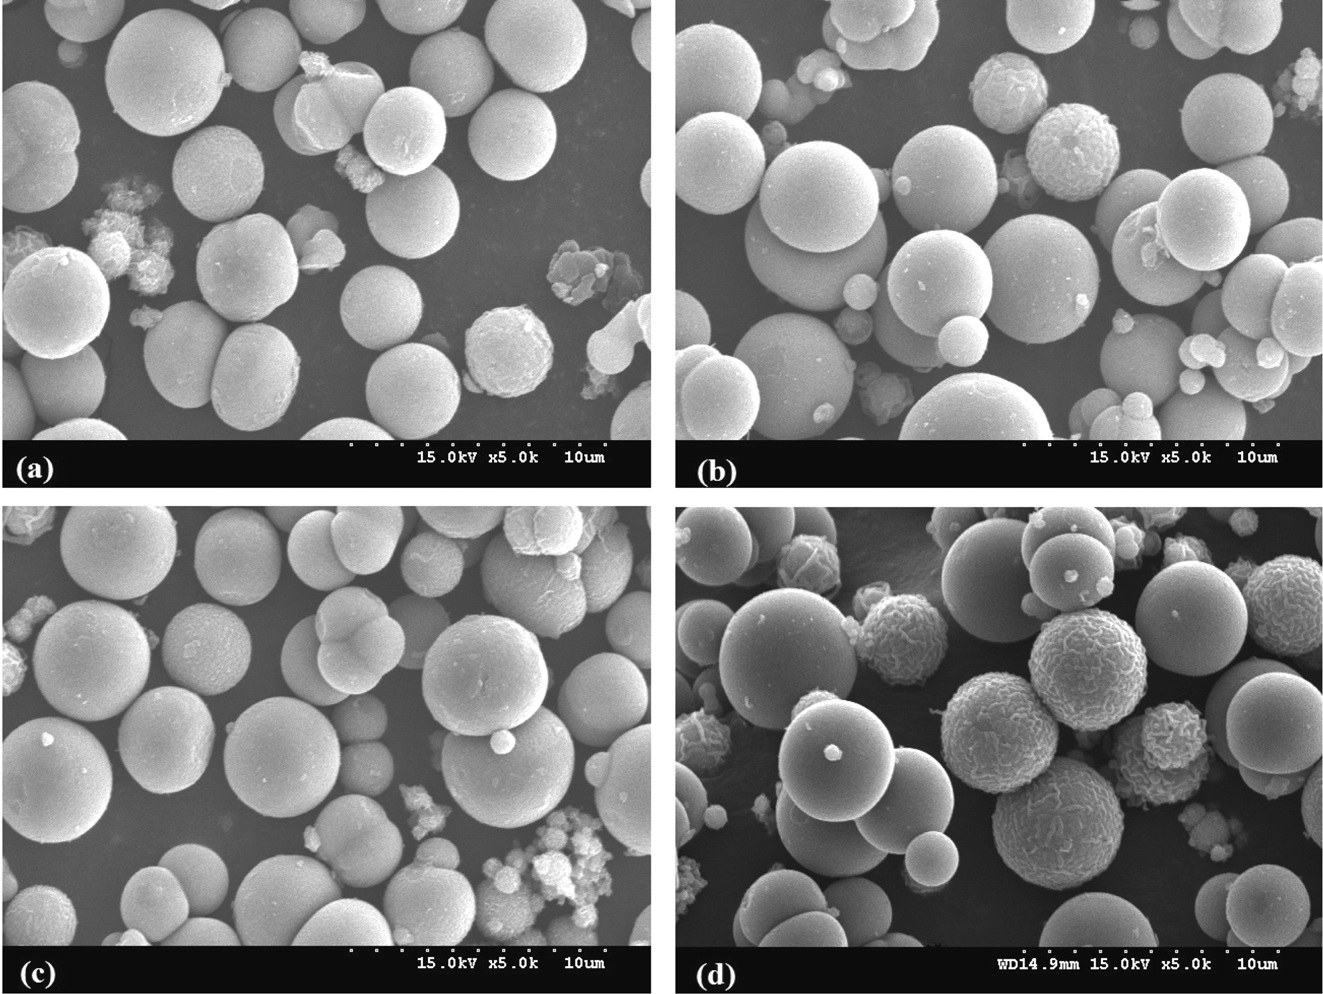 Scanning electron microscopy of PANI-TiO2 composites calcined at different calcination temperatures ((a) 350, (b) 450, (c) 550, and (d) 650 ℃).